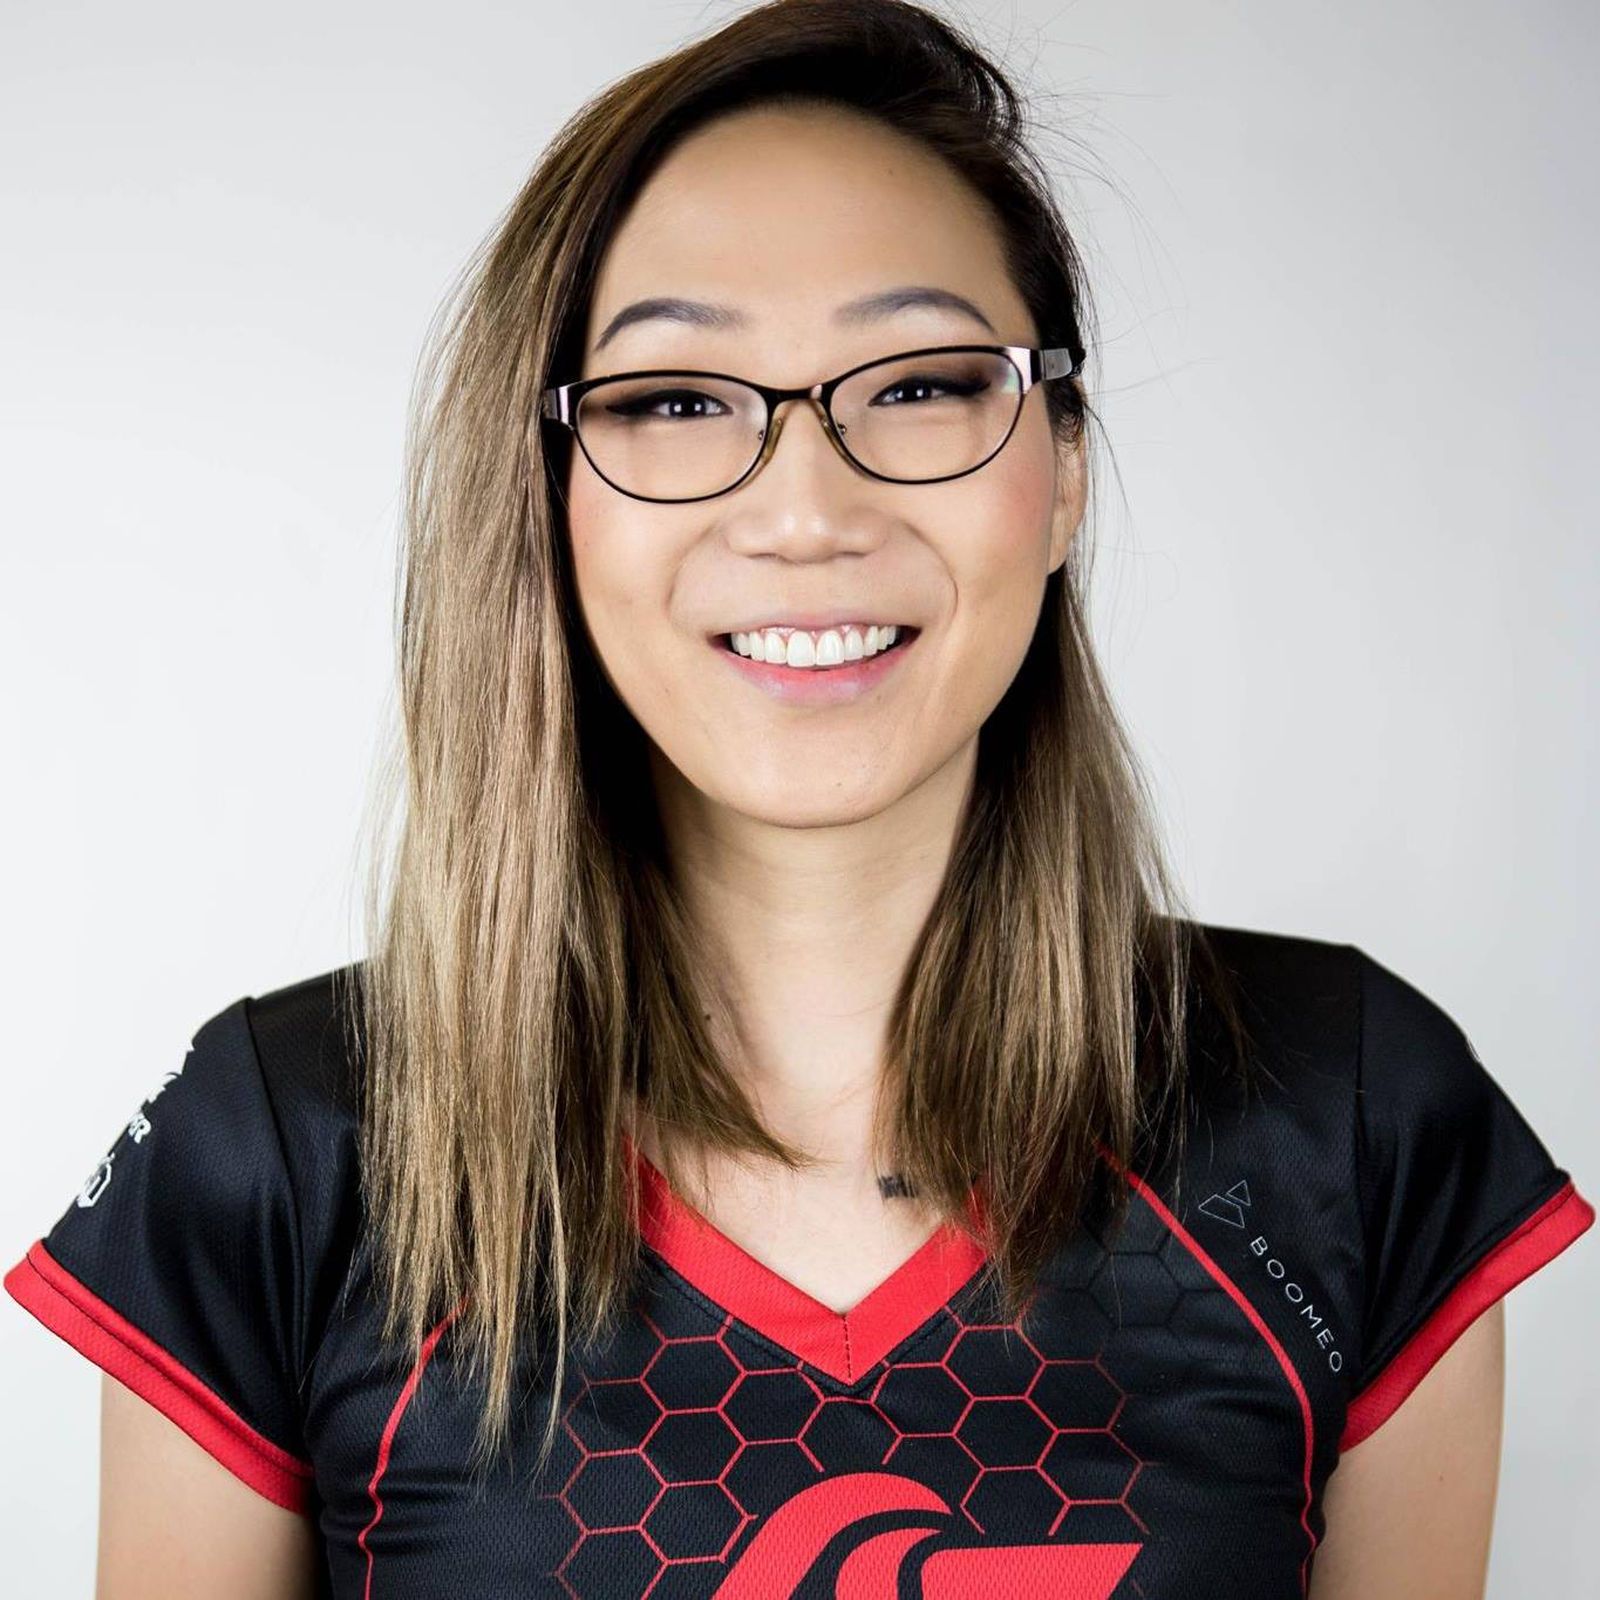 Top 10 highest earning female eSports gamers in the world image 4